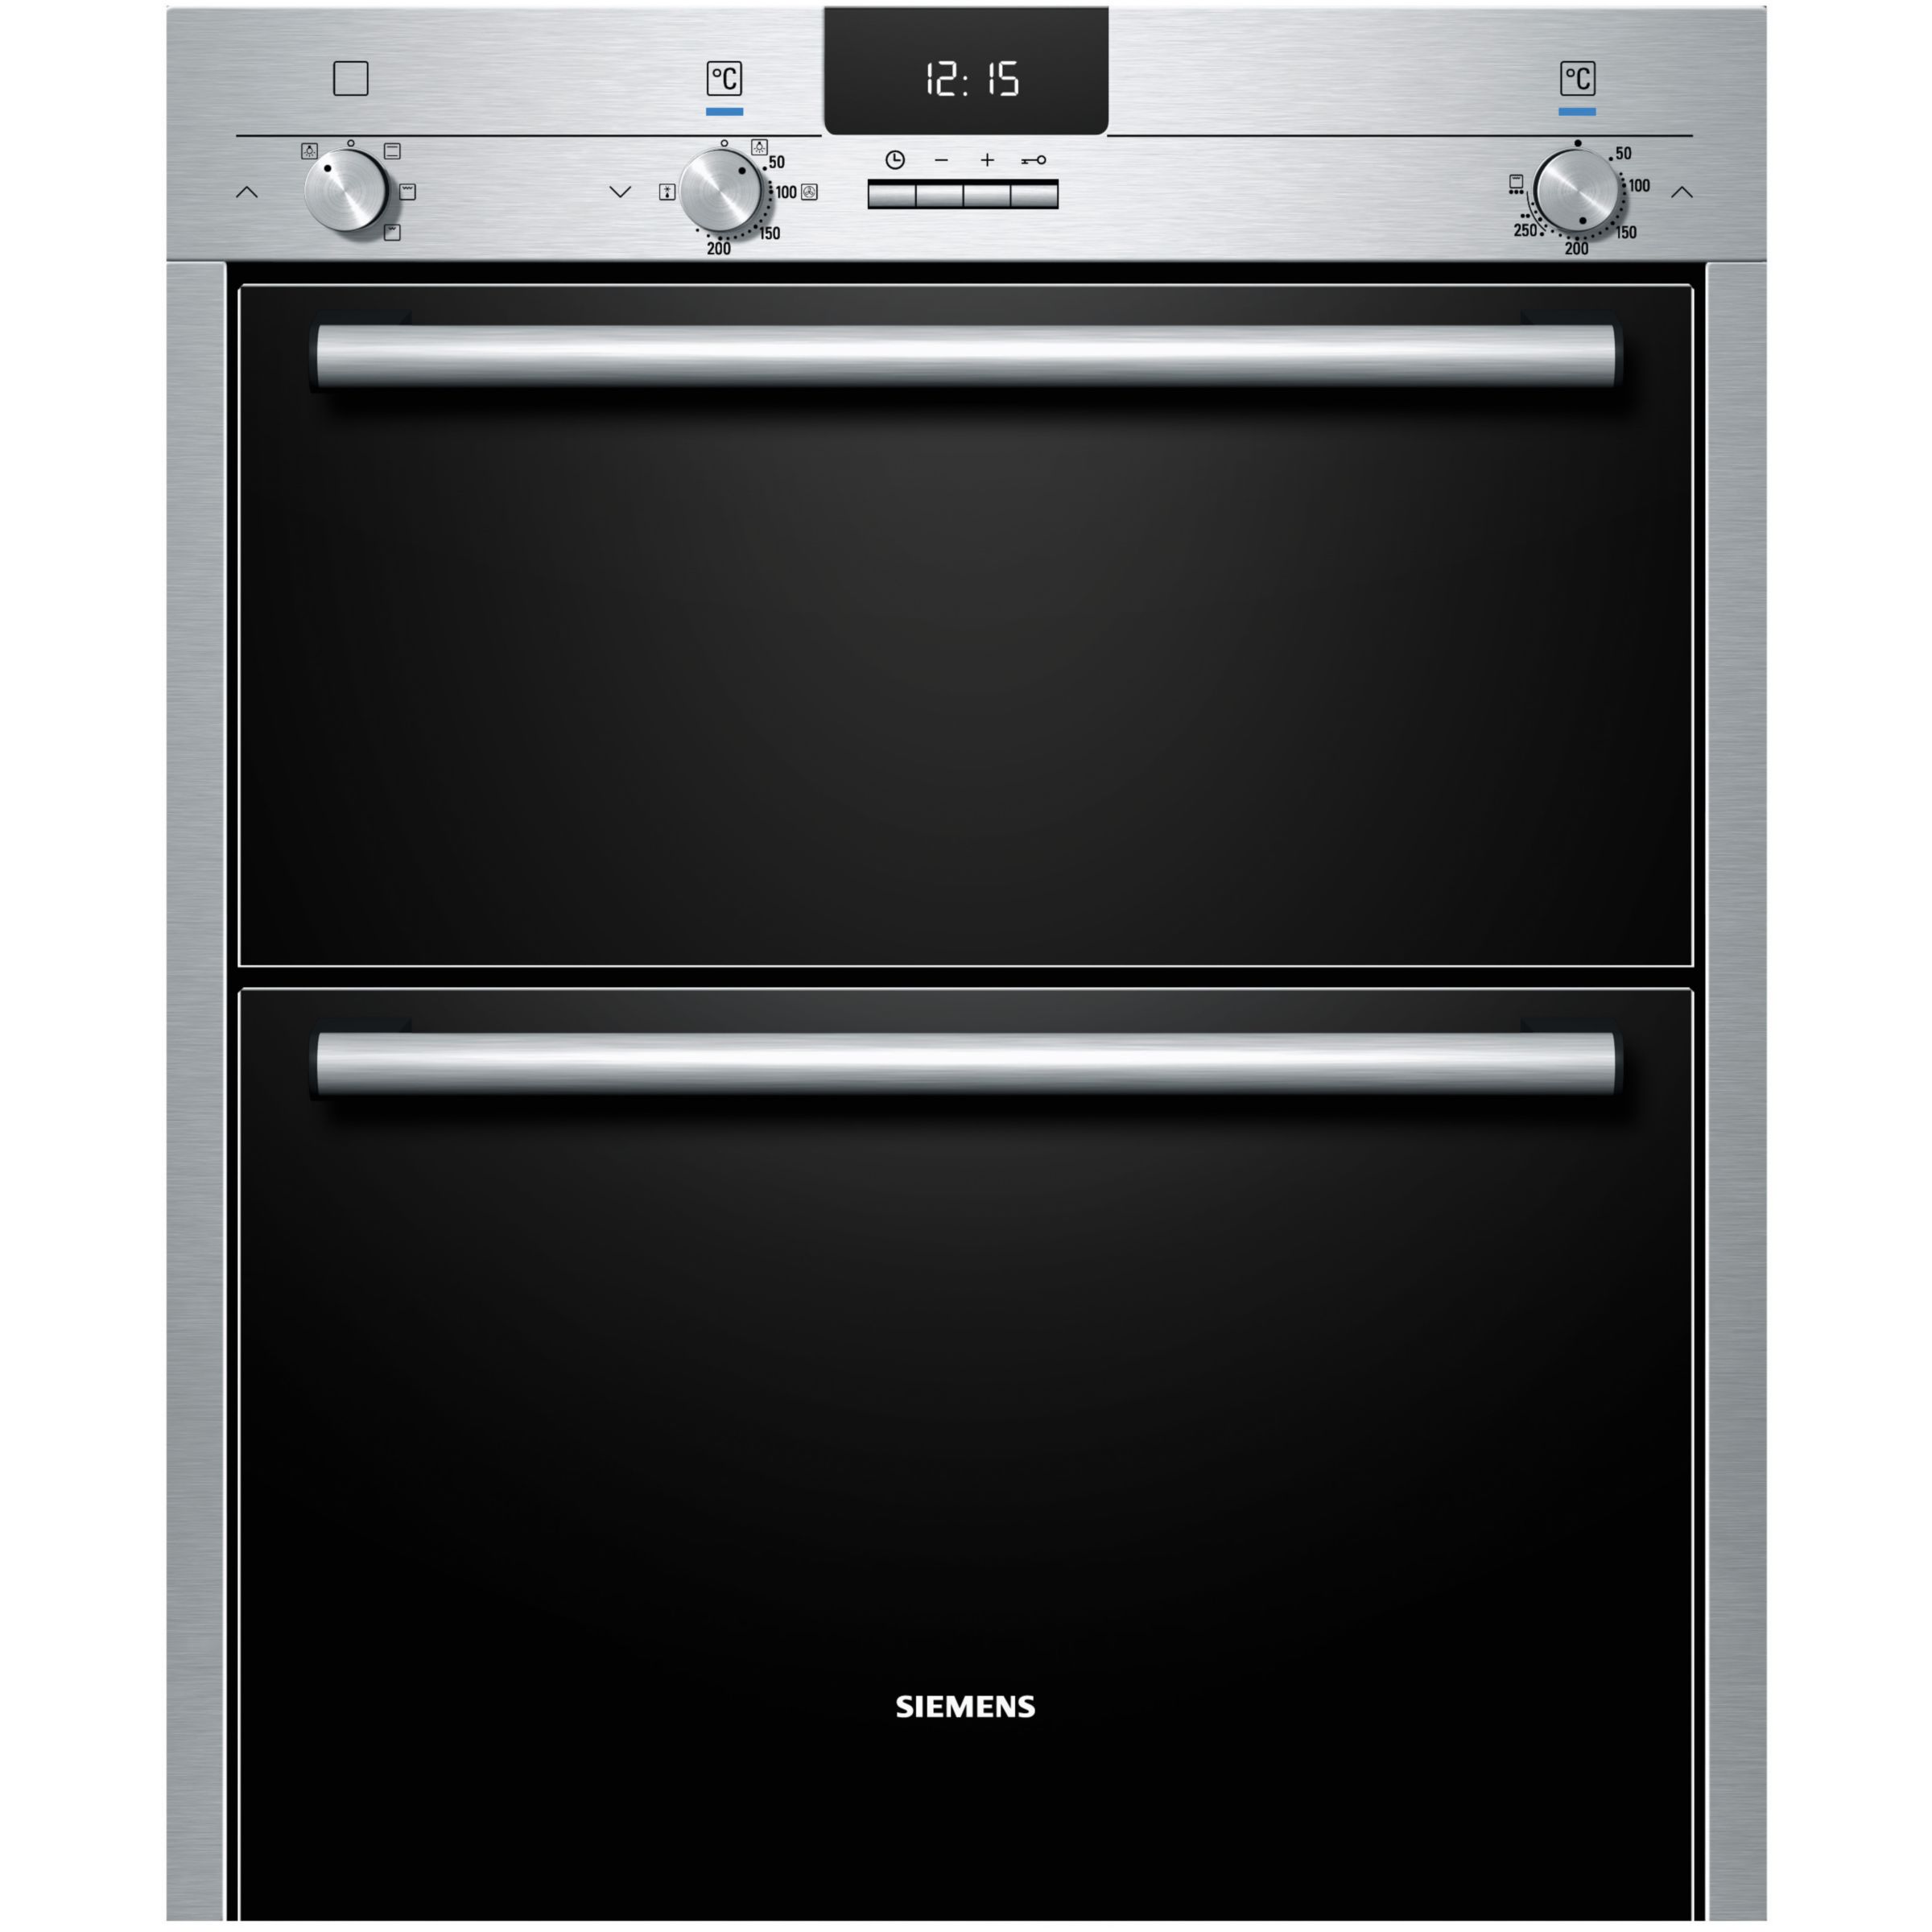 Siemens HB13NB521B Double Electric Oven, Stainless Steel